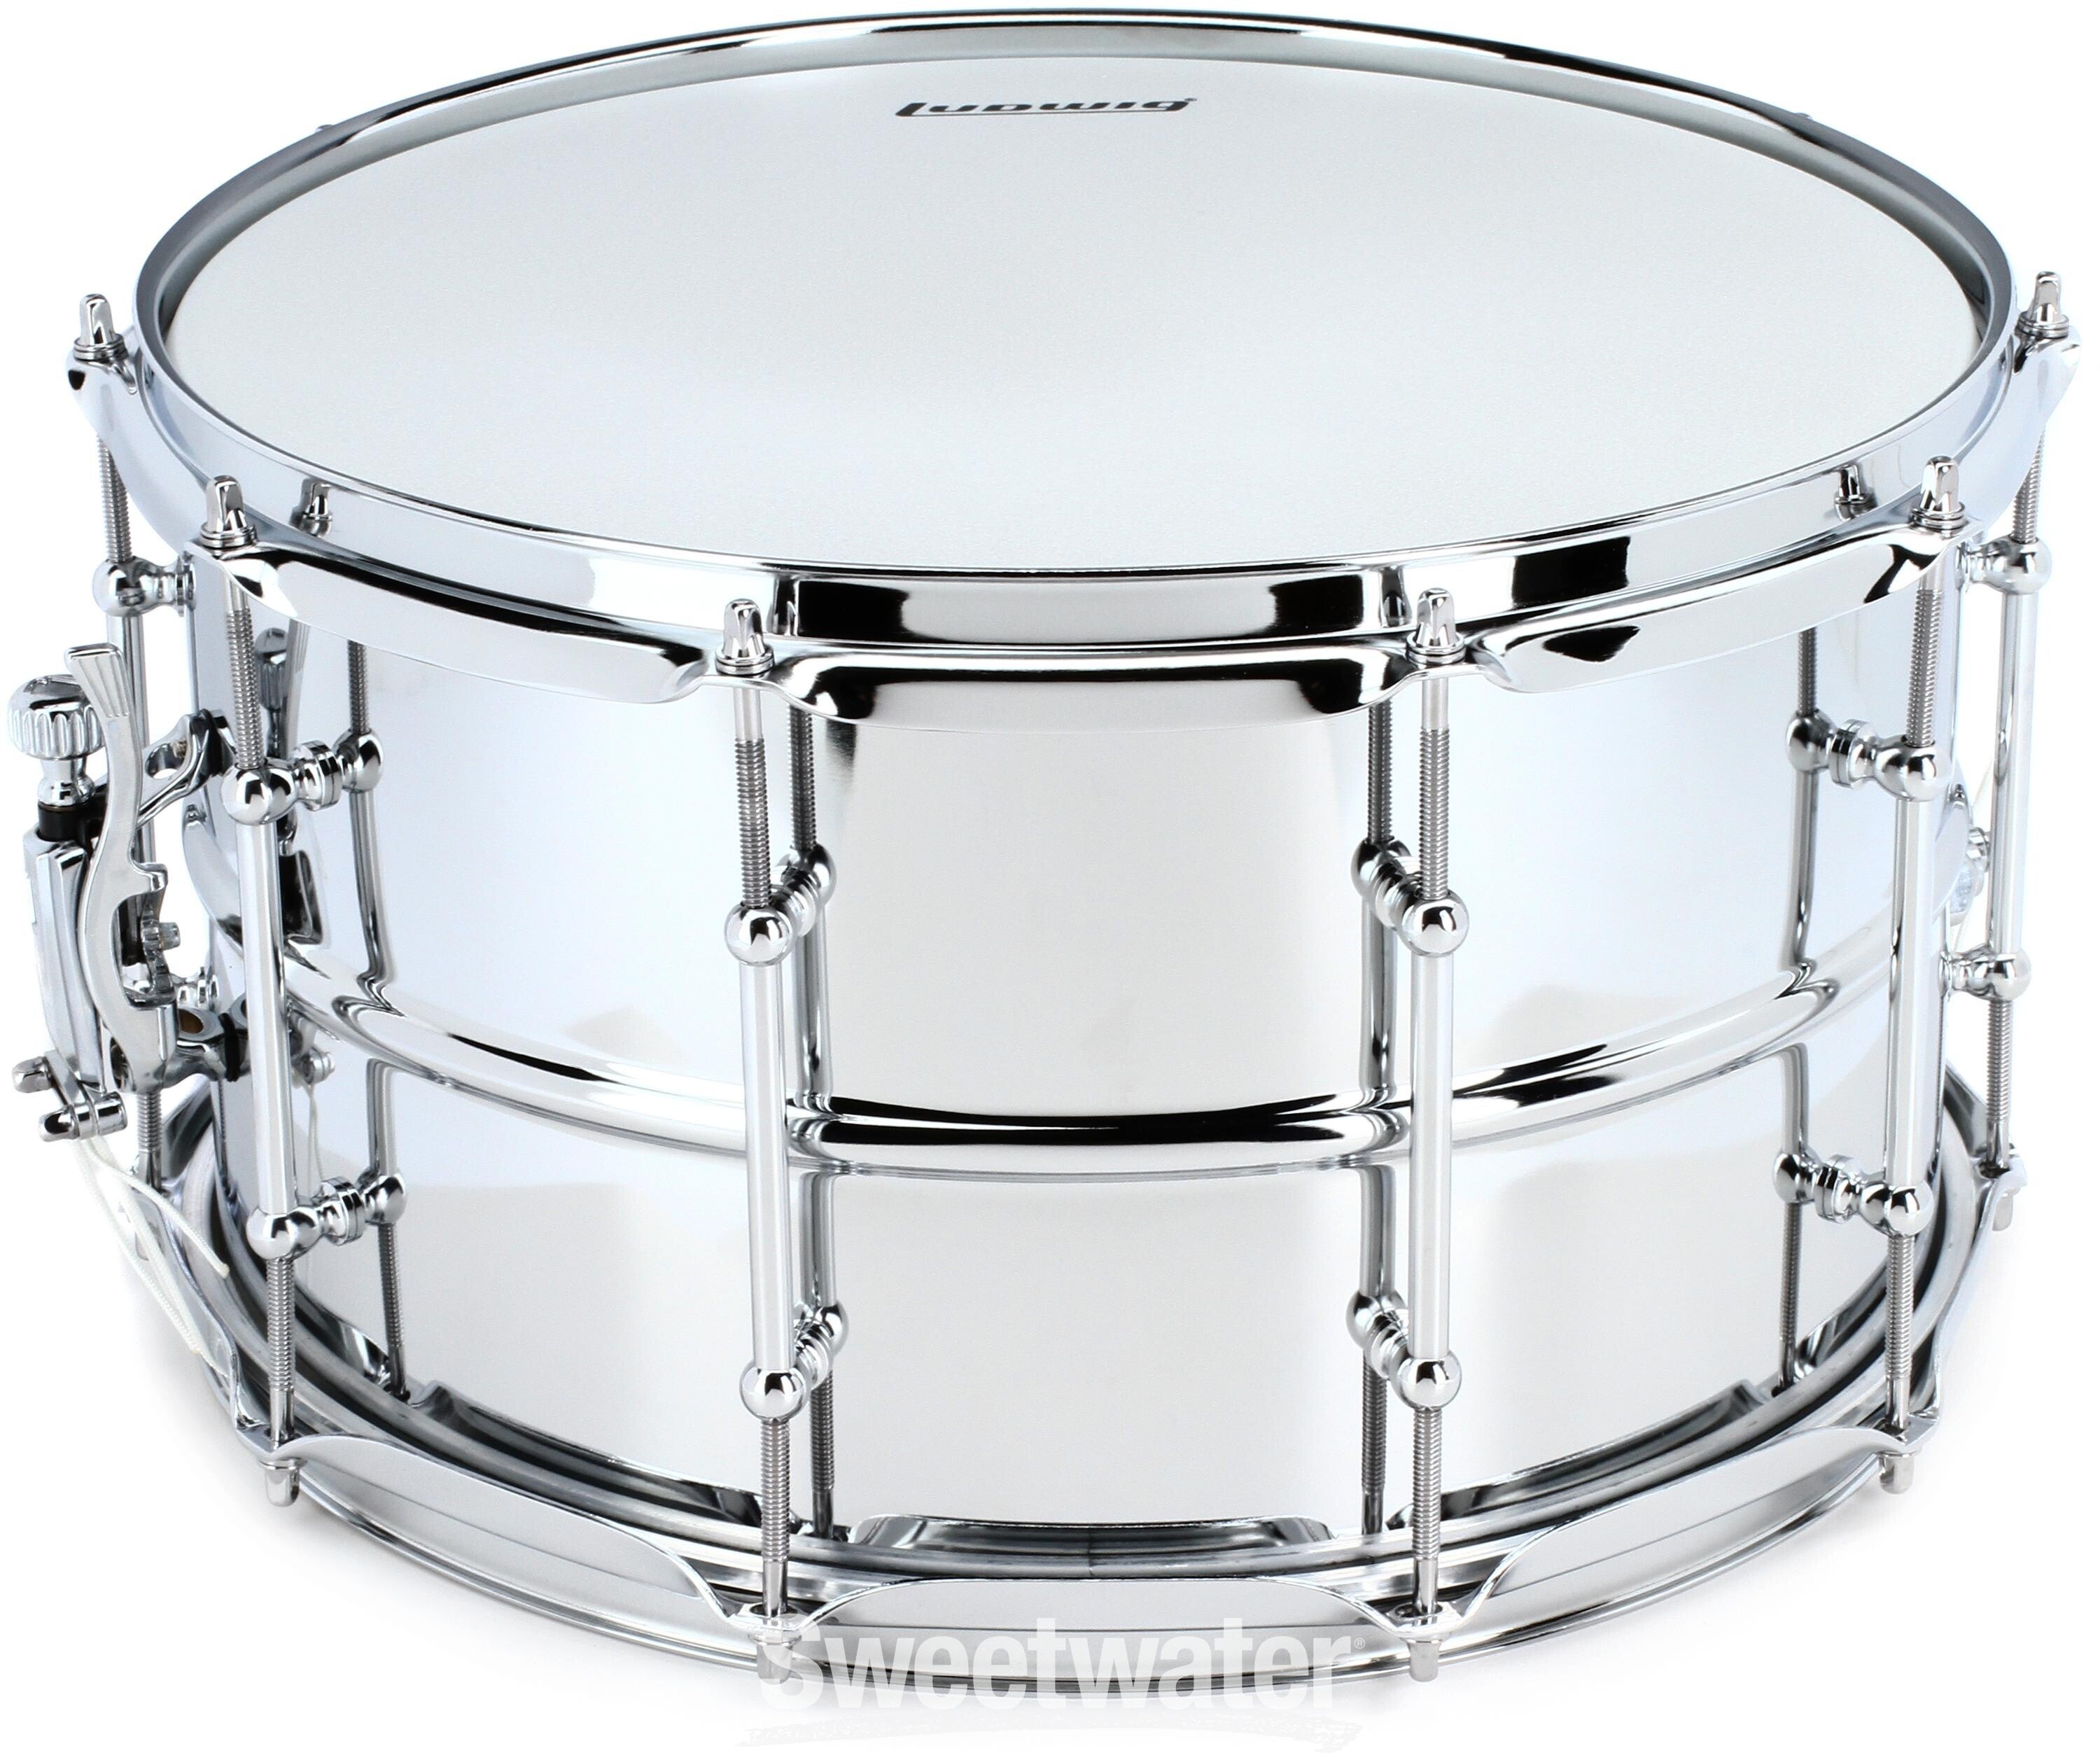 Ludwig Supralite Steel Snare Drum - 8 x 14-inch - Polished